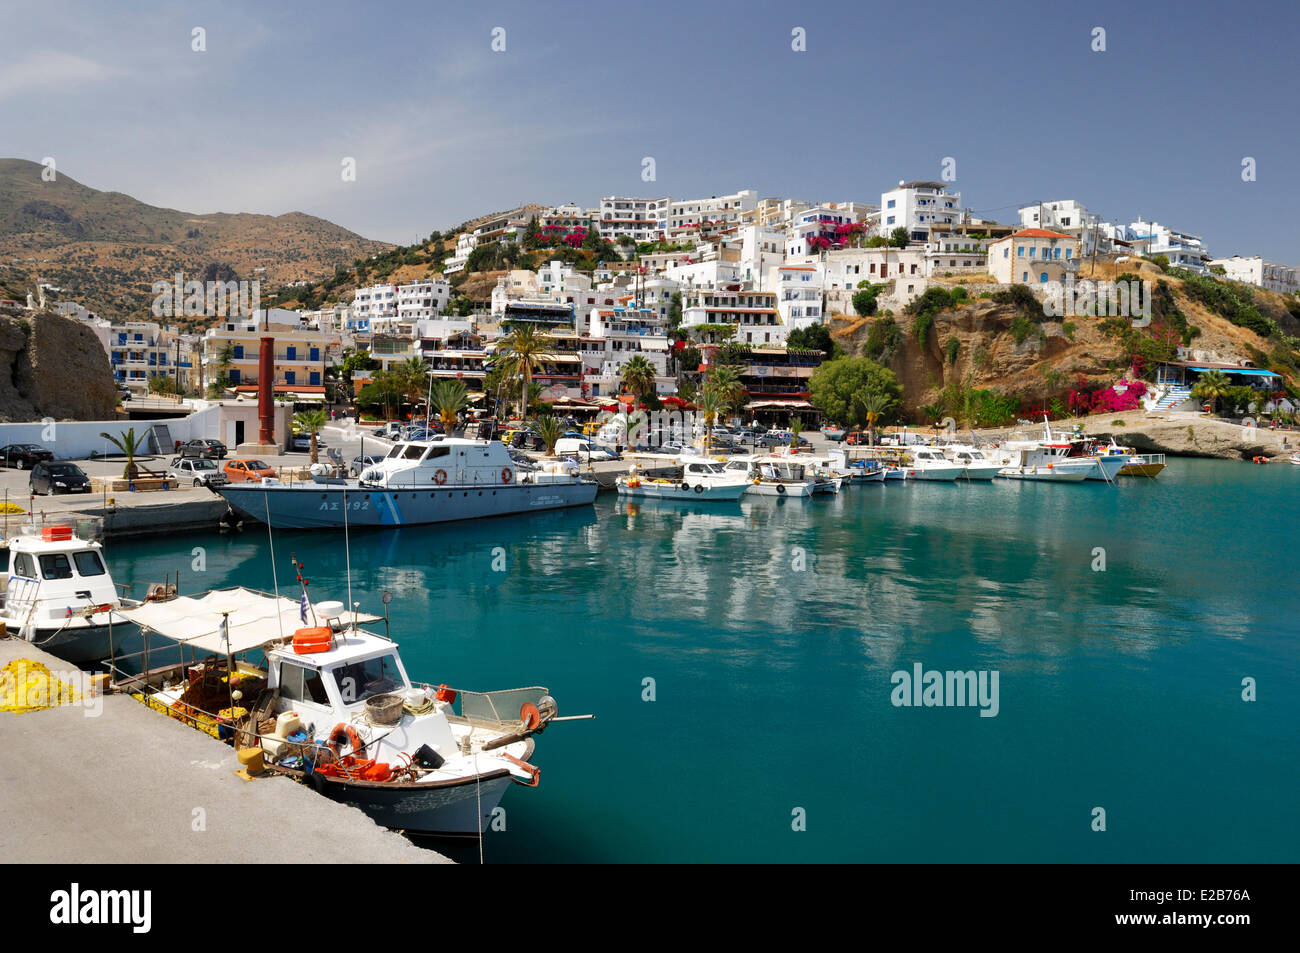 Greece, Crete, Agia Galini, village on the hill seen from the harbor Stock Photo